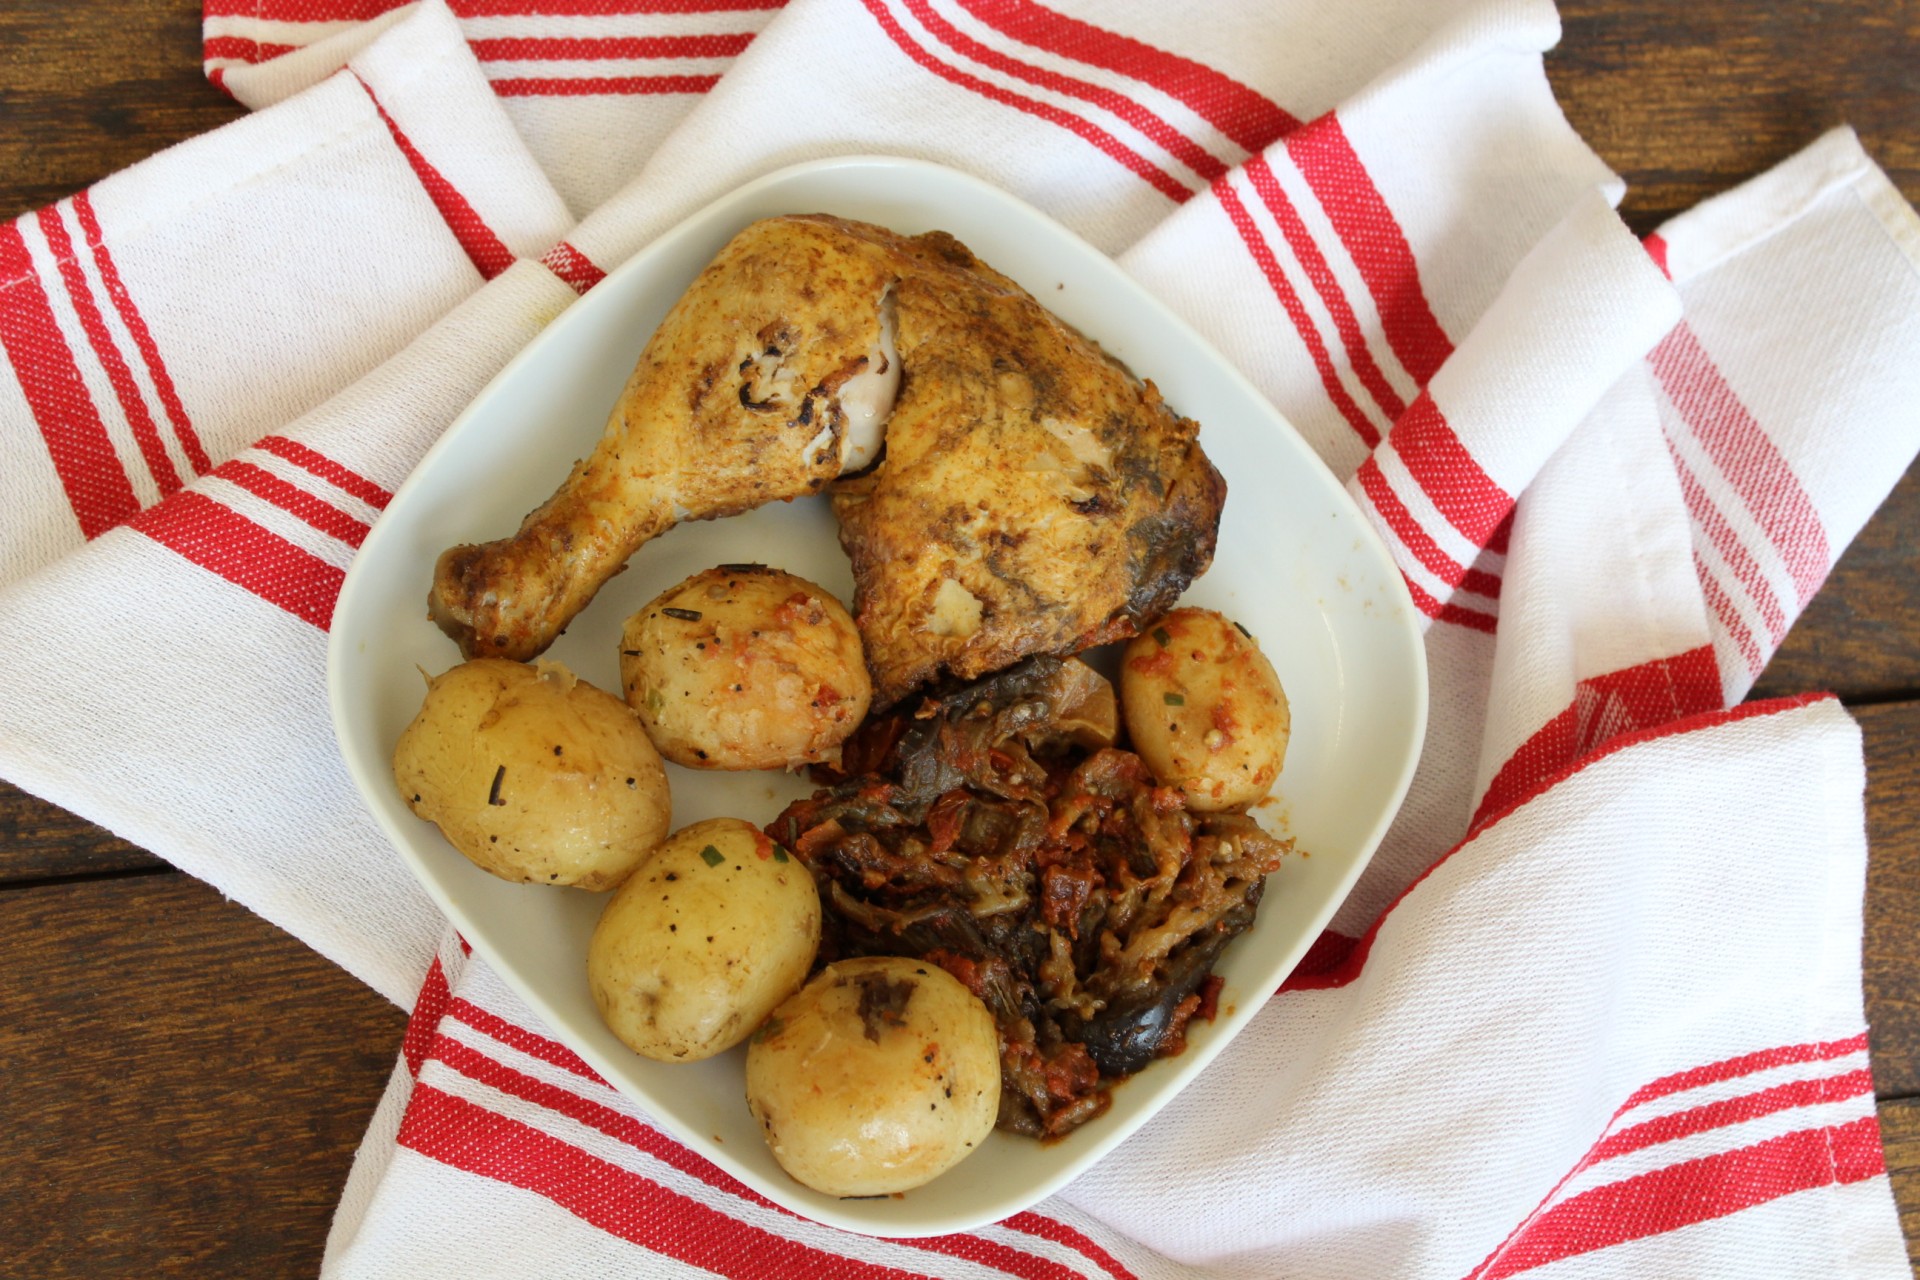 Chicken and potatoes